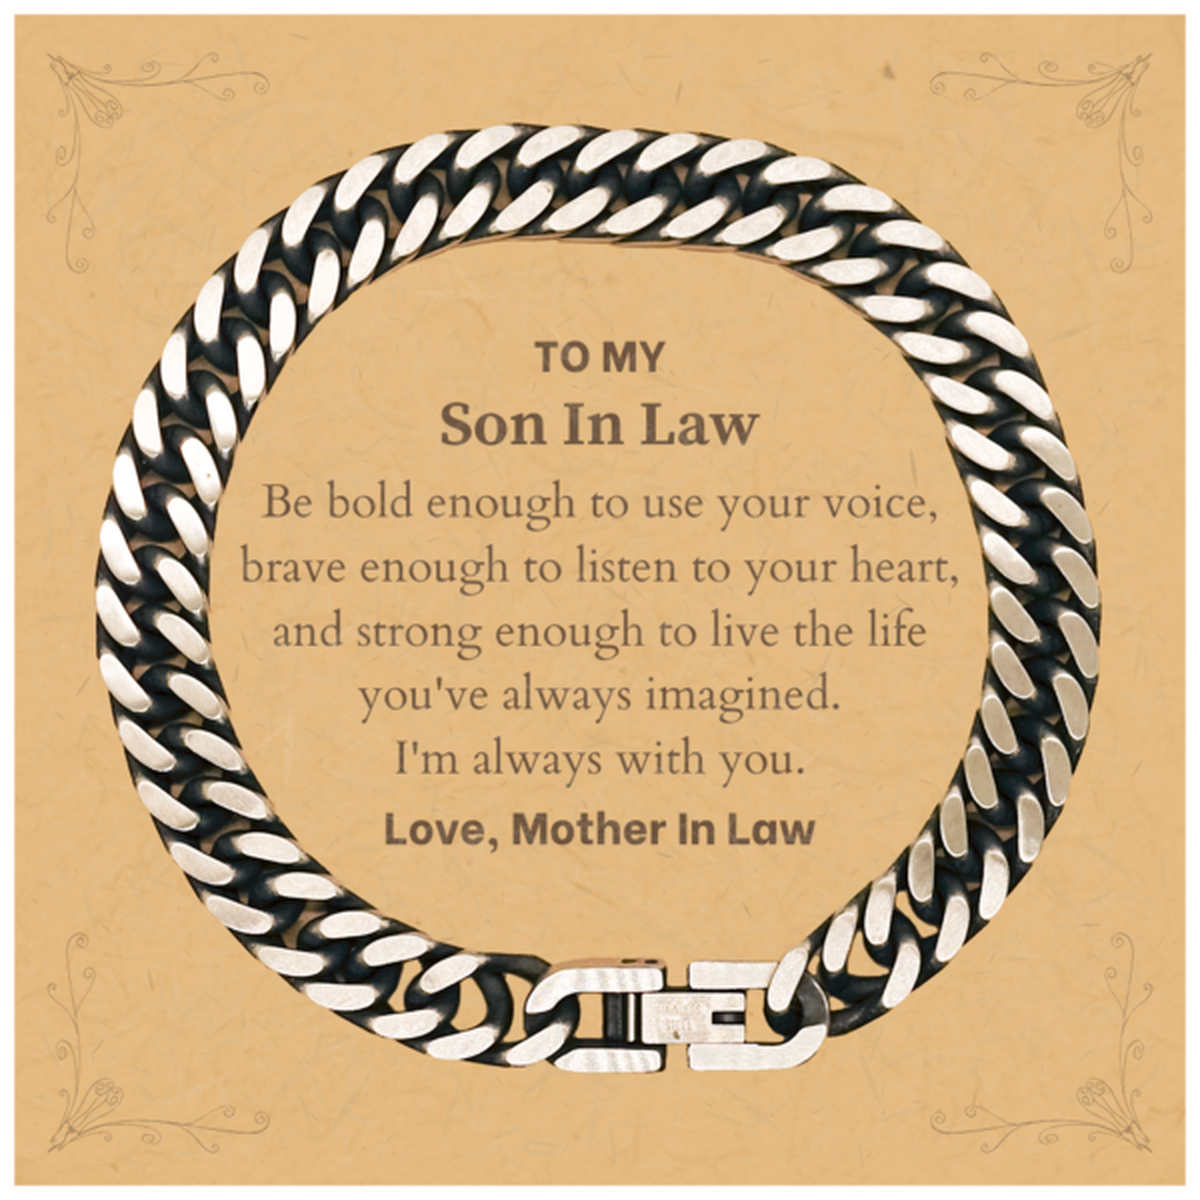 Keepsake Son In Law Cuban Link Chain Bracelet Gift Idea Graduation Christmas Birthday Son In Law from Mother In Law, Son In Law Be bold enough to use your voice, brave enough to listen to your heart. Love, Mother In Law